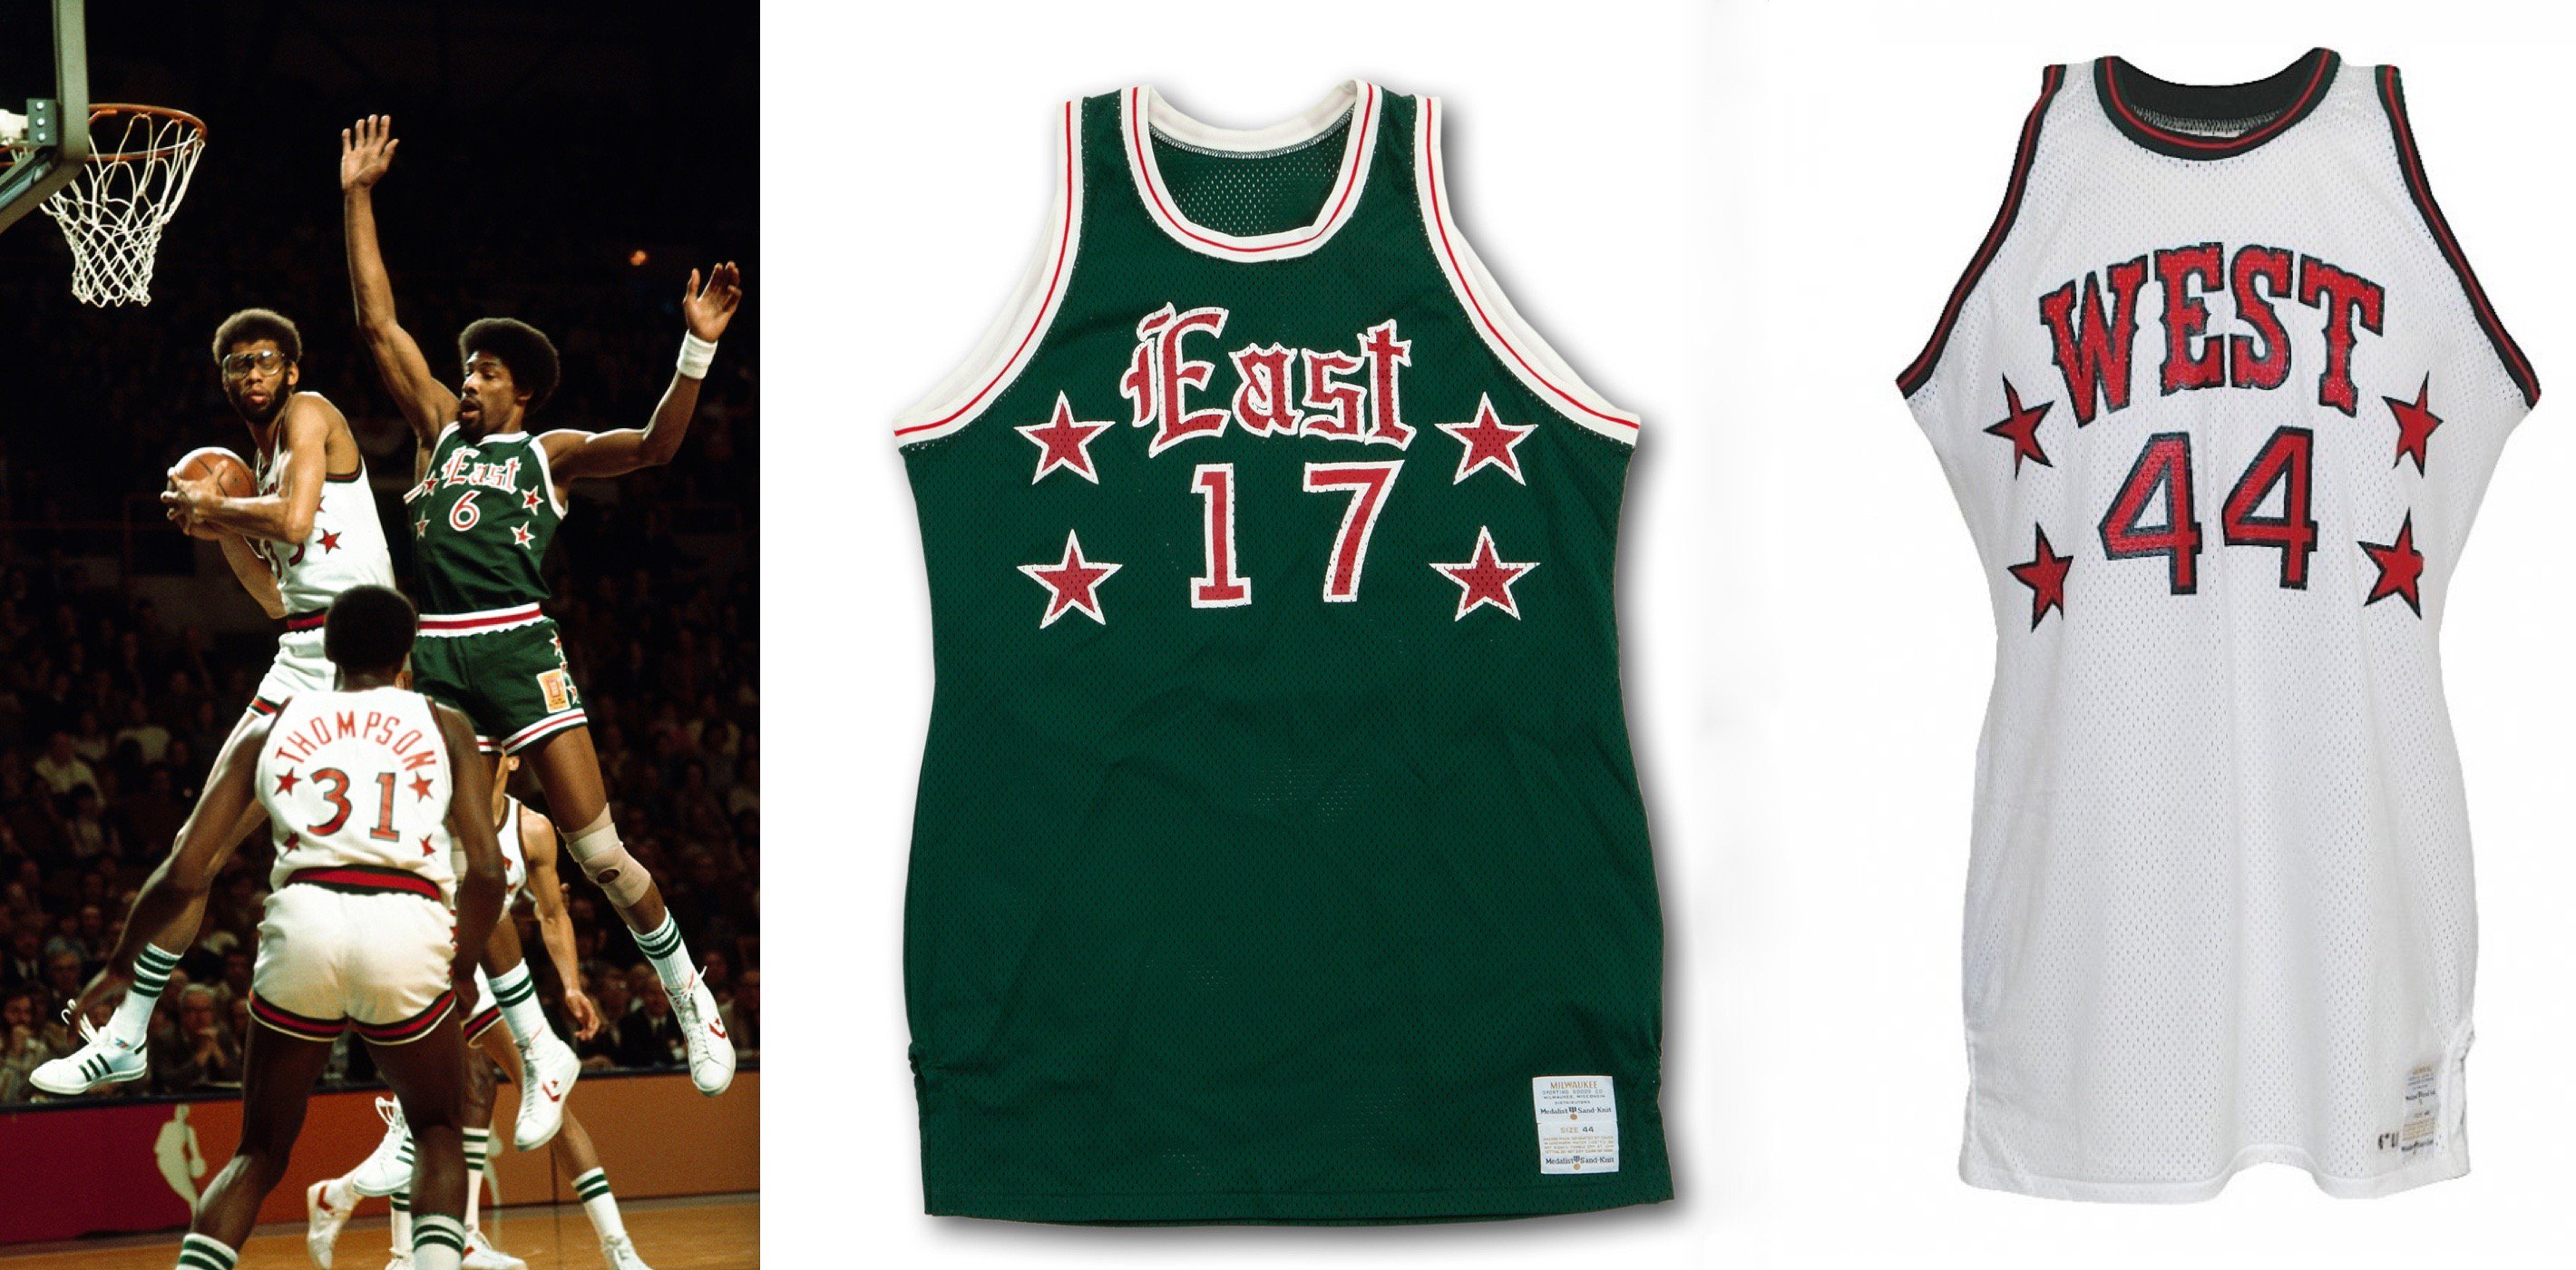 Paul Lukas on X: 1977 NBA All-Star Game was in Milwaukee, so the